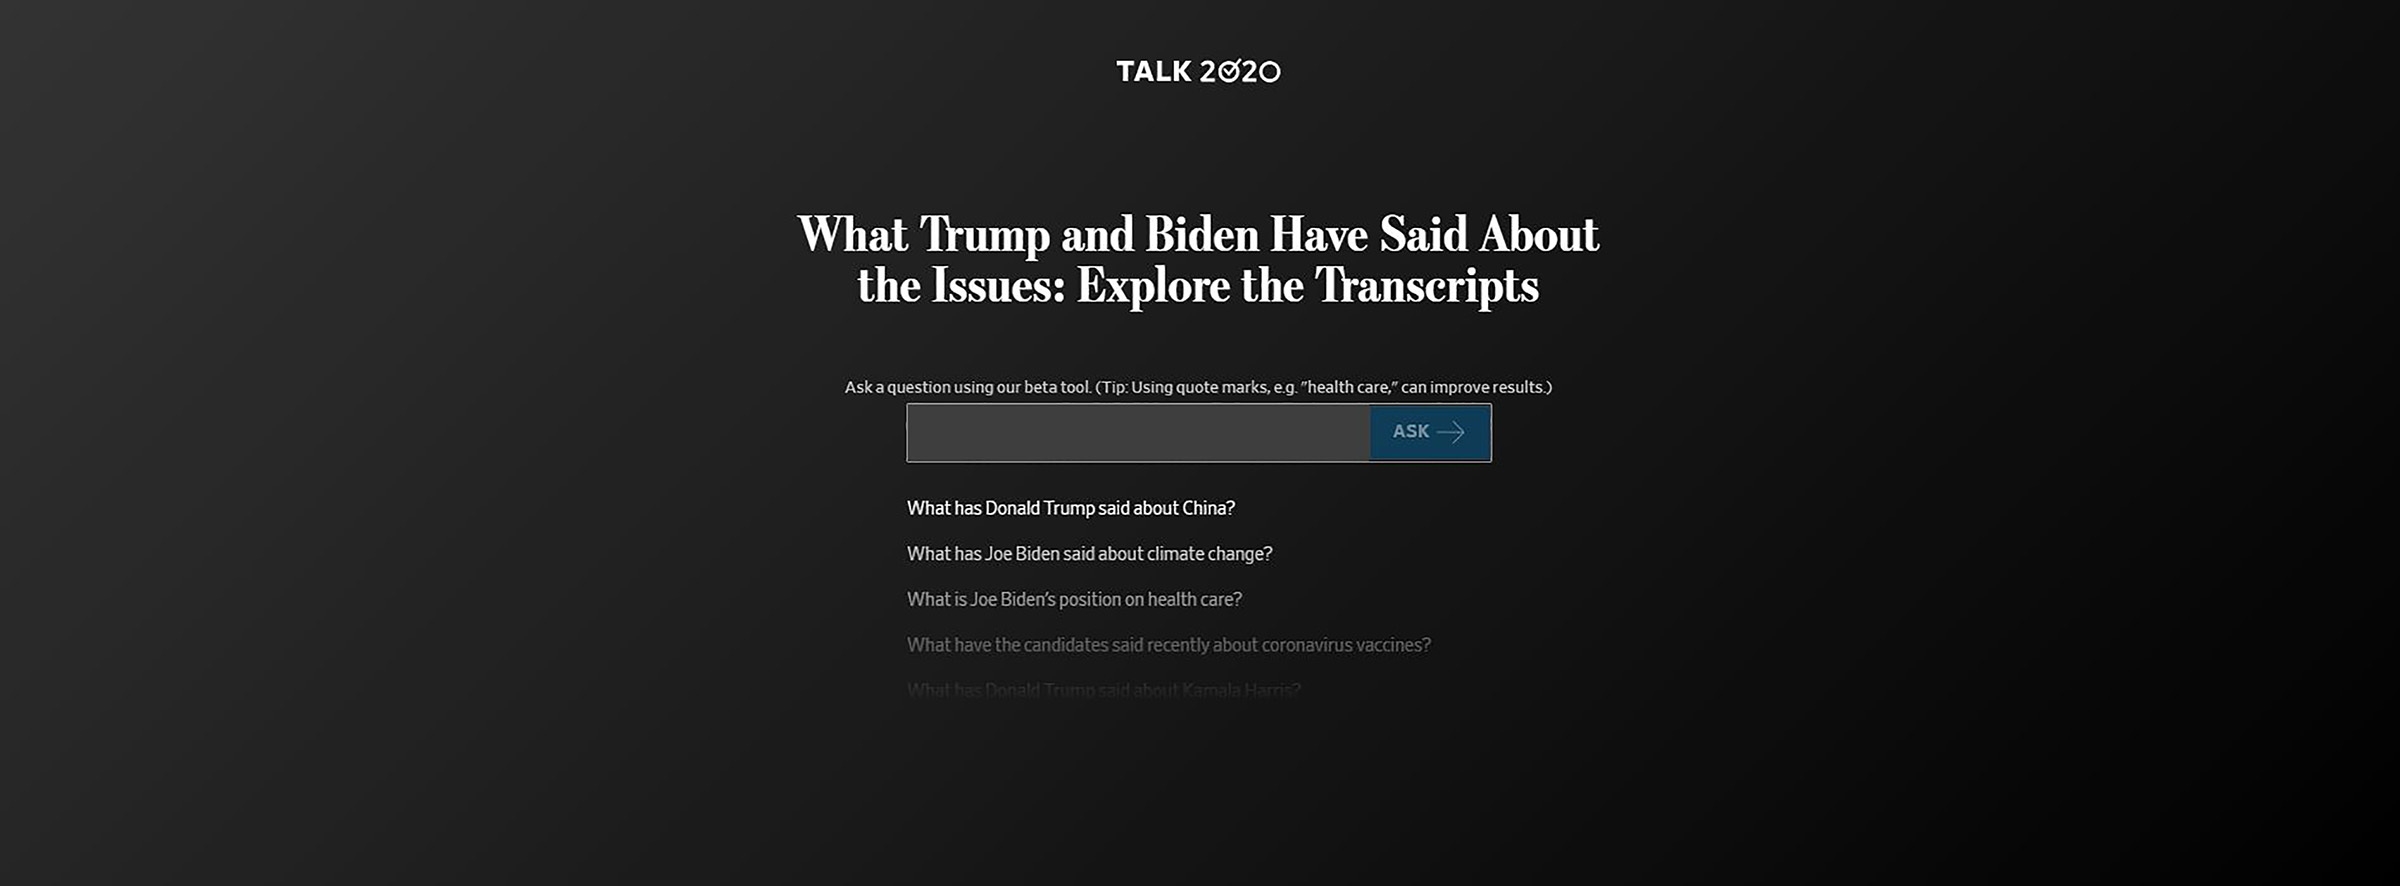 A black background with a text field for users to enter their questions. The page has text that says "TALK 2020, What Trump and Biden Have Said About the Issues: Explore the Transcripts. 